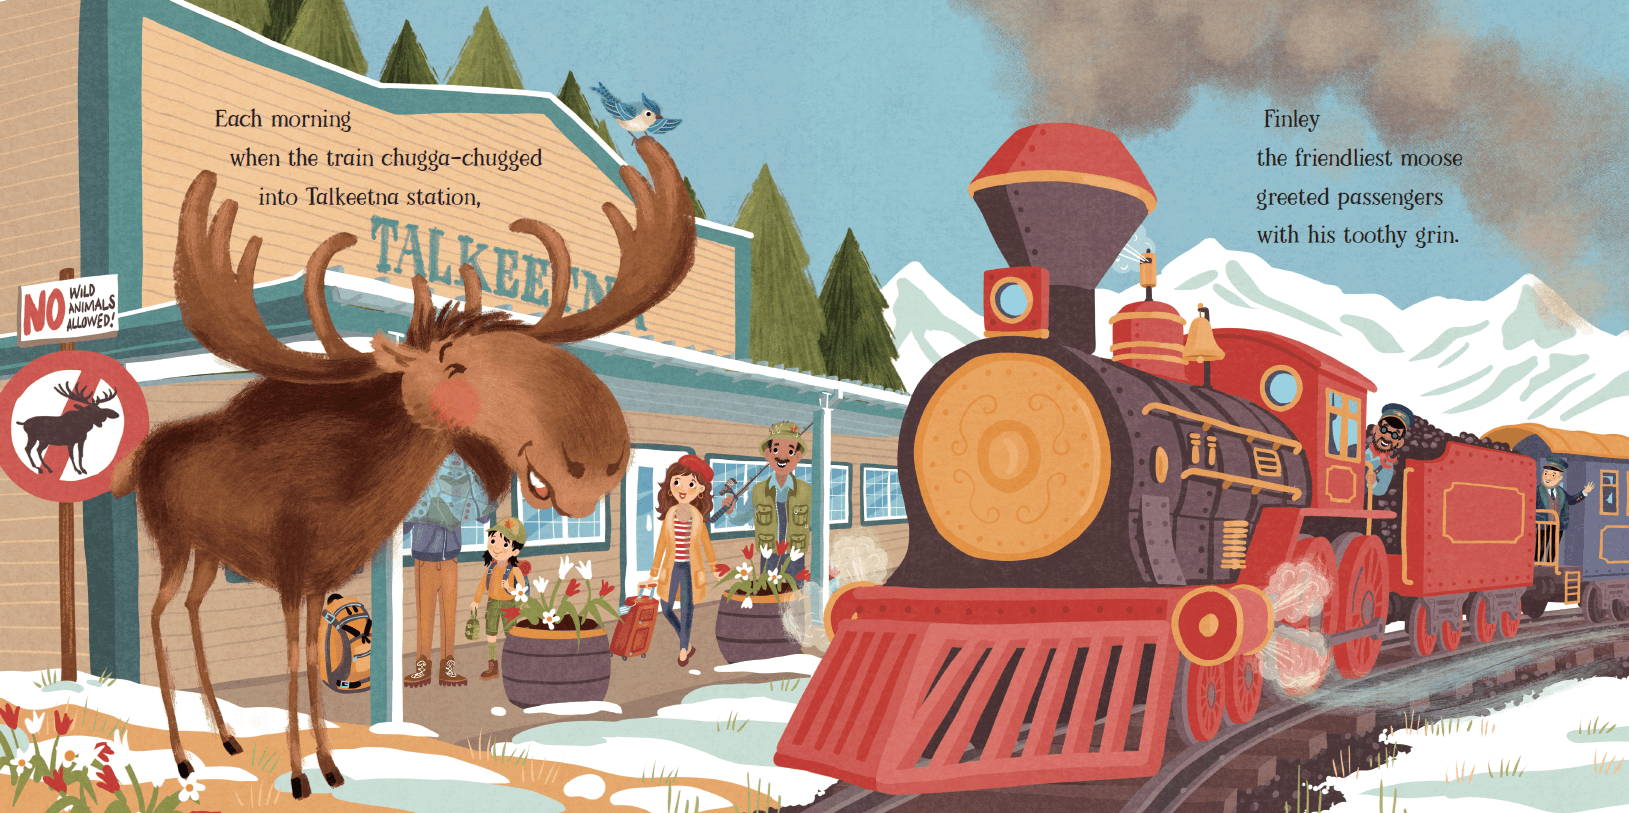 Finley: A Moose on The Caboose